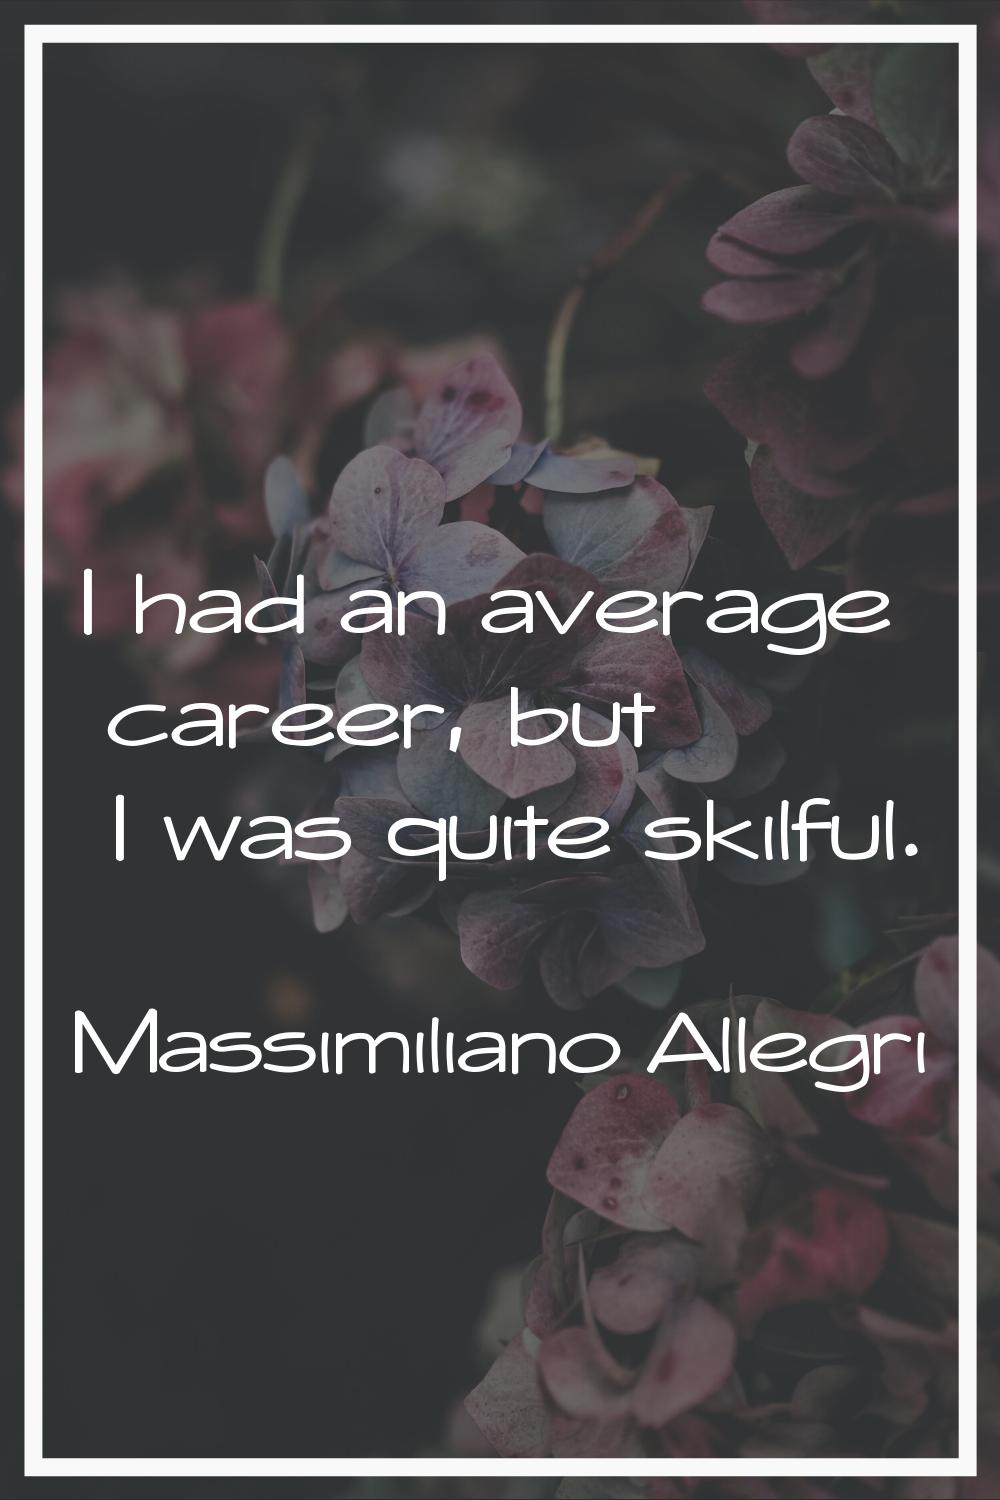 I had an average career, but I was quite skilful.